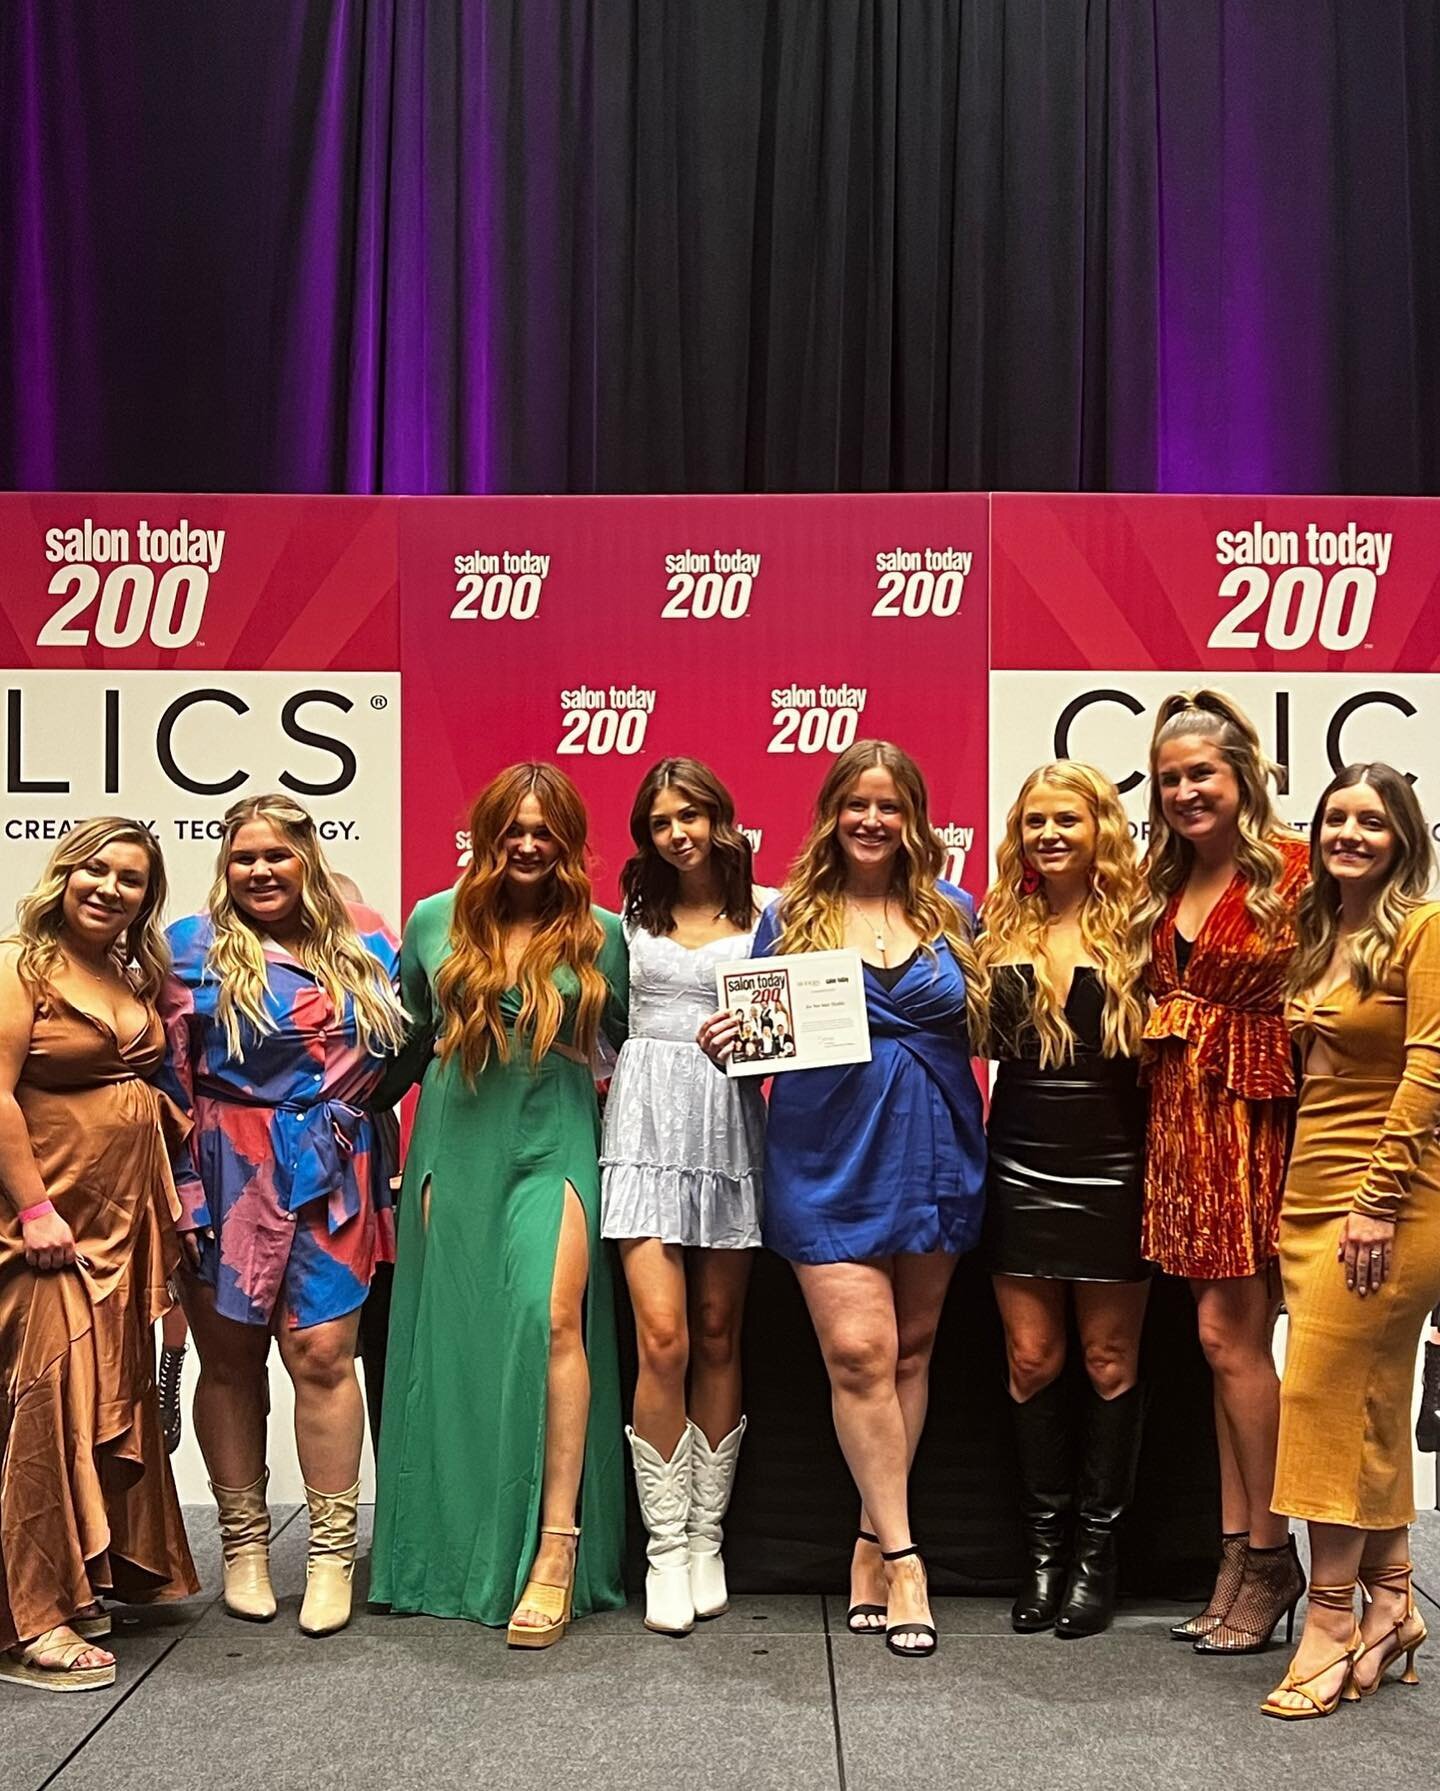 Team Six Ten had the absolute best time celebrating being named a Top 200 Salon by Salon Today Magazine.

It was such an honor and we wish our entire team would have been able to attend to help us accept this award but, there is always next year!

On